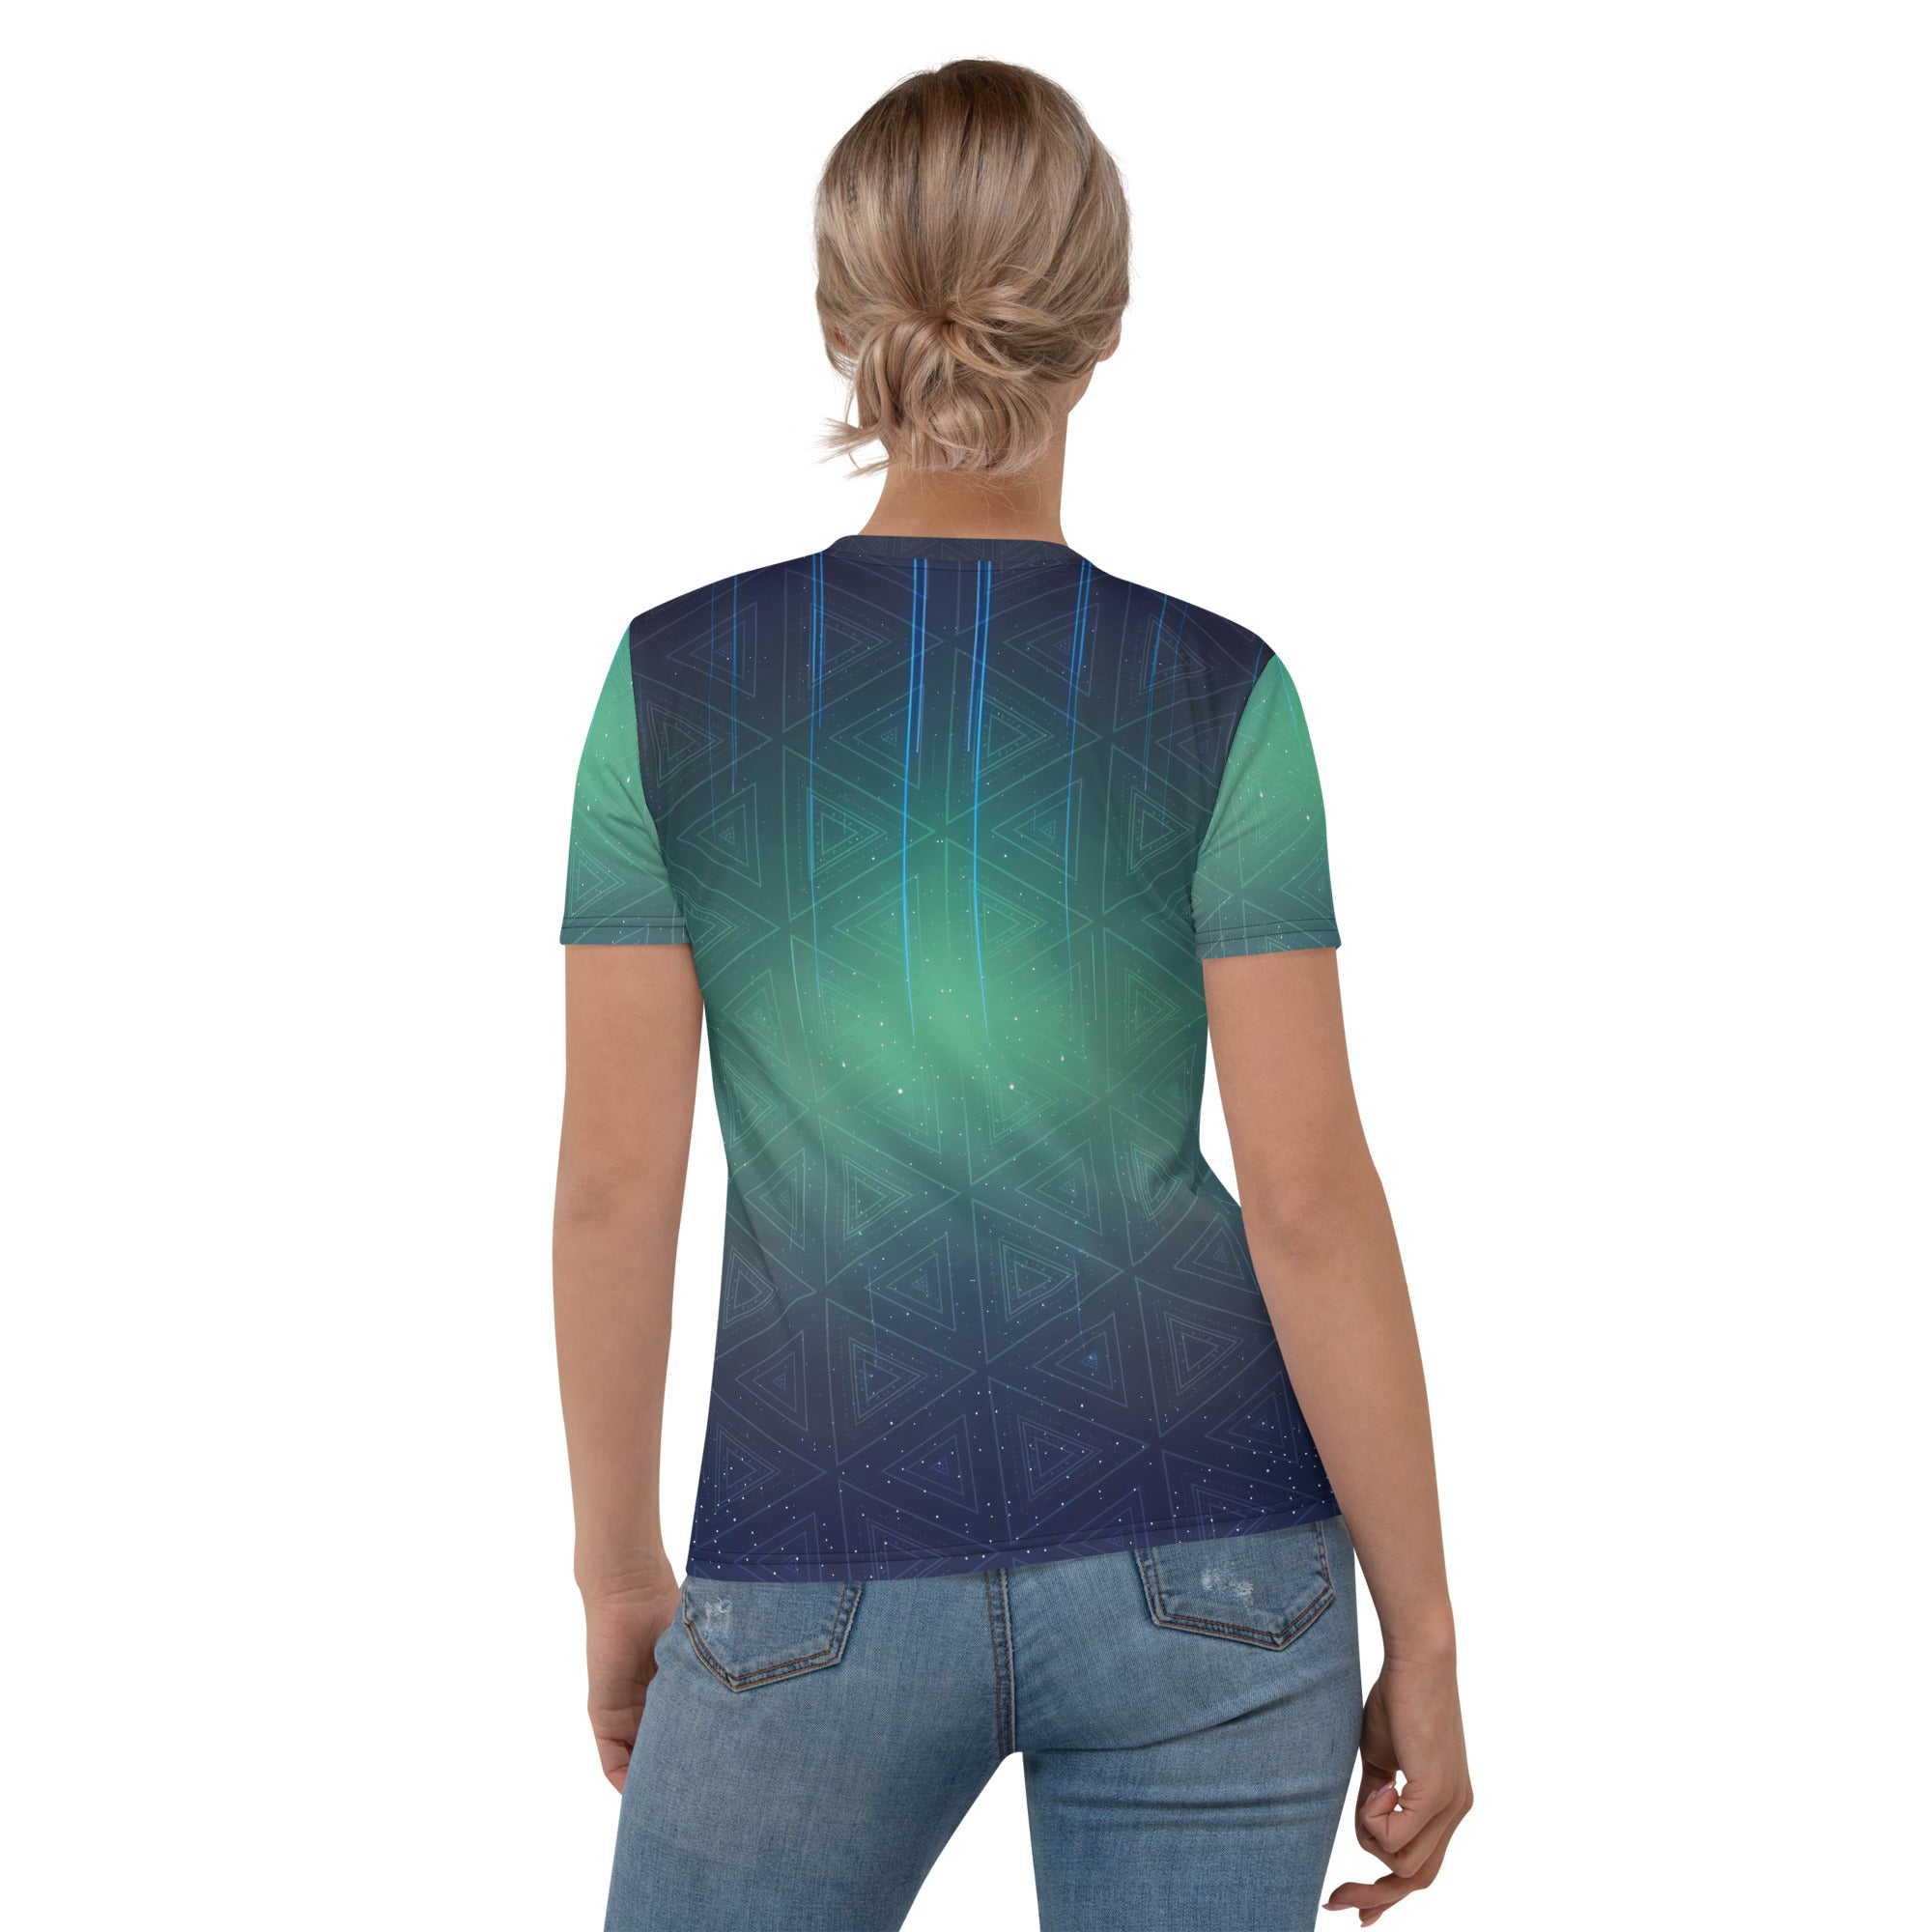 Enigma of Elegance Women's T-Shirt - Back View